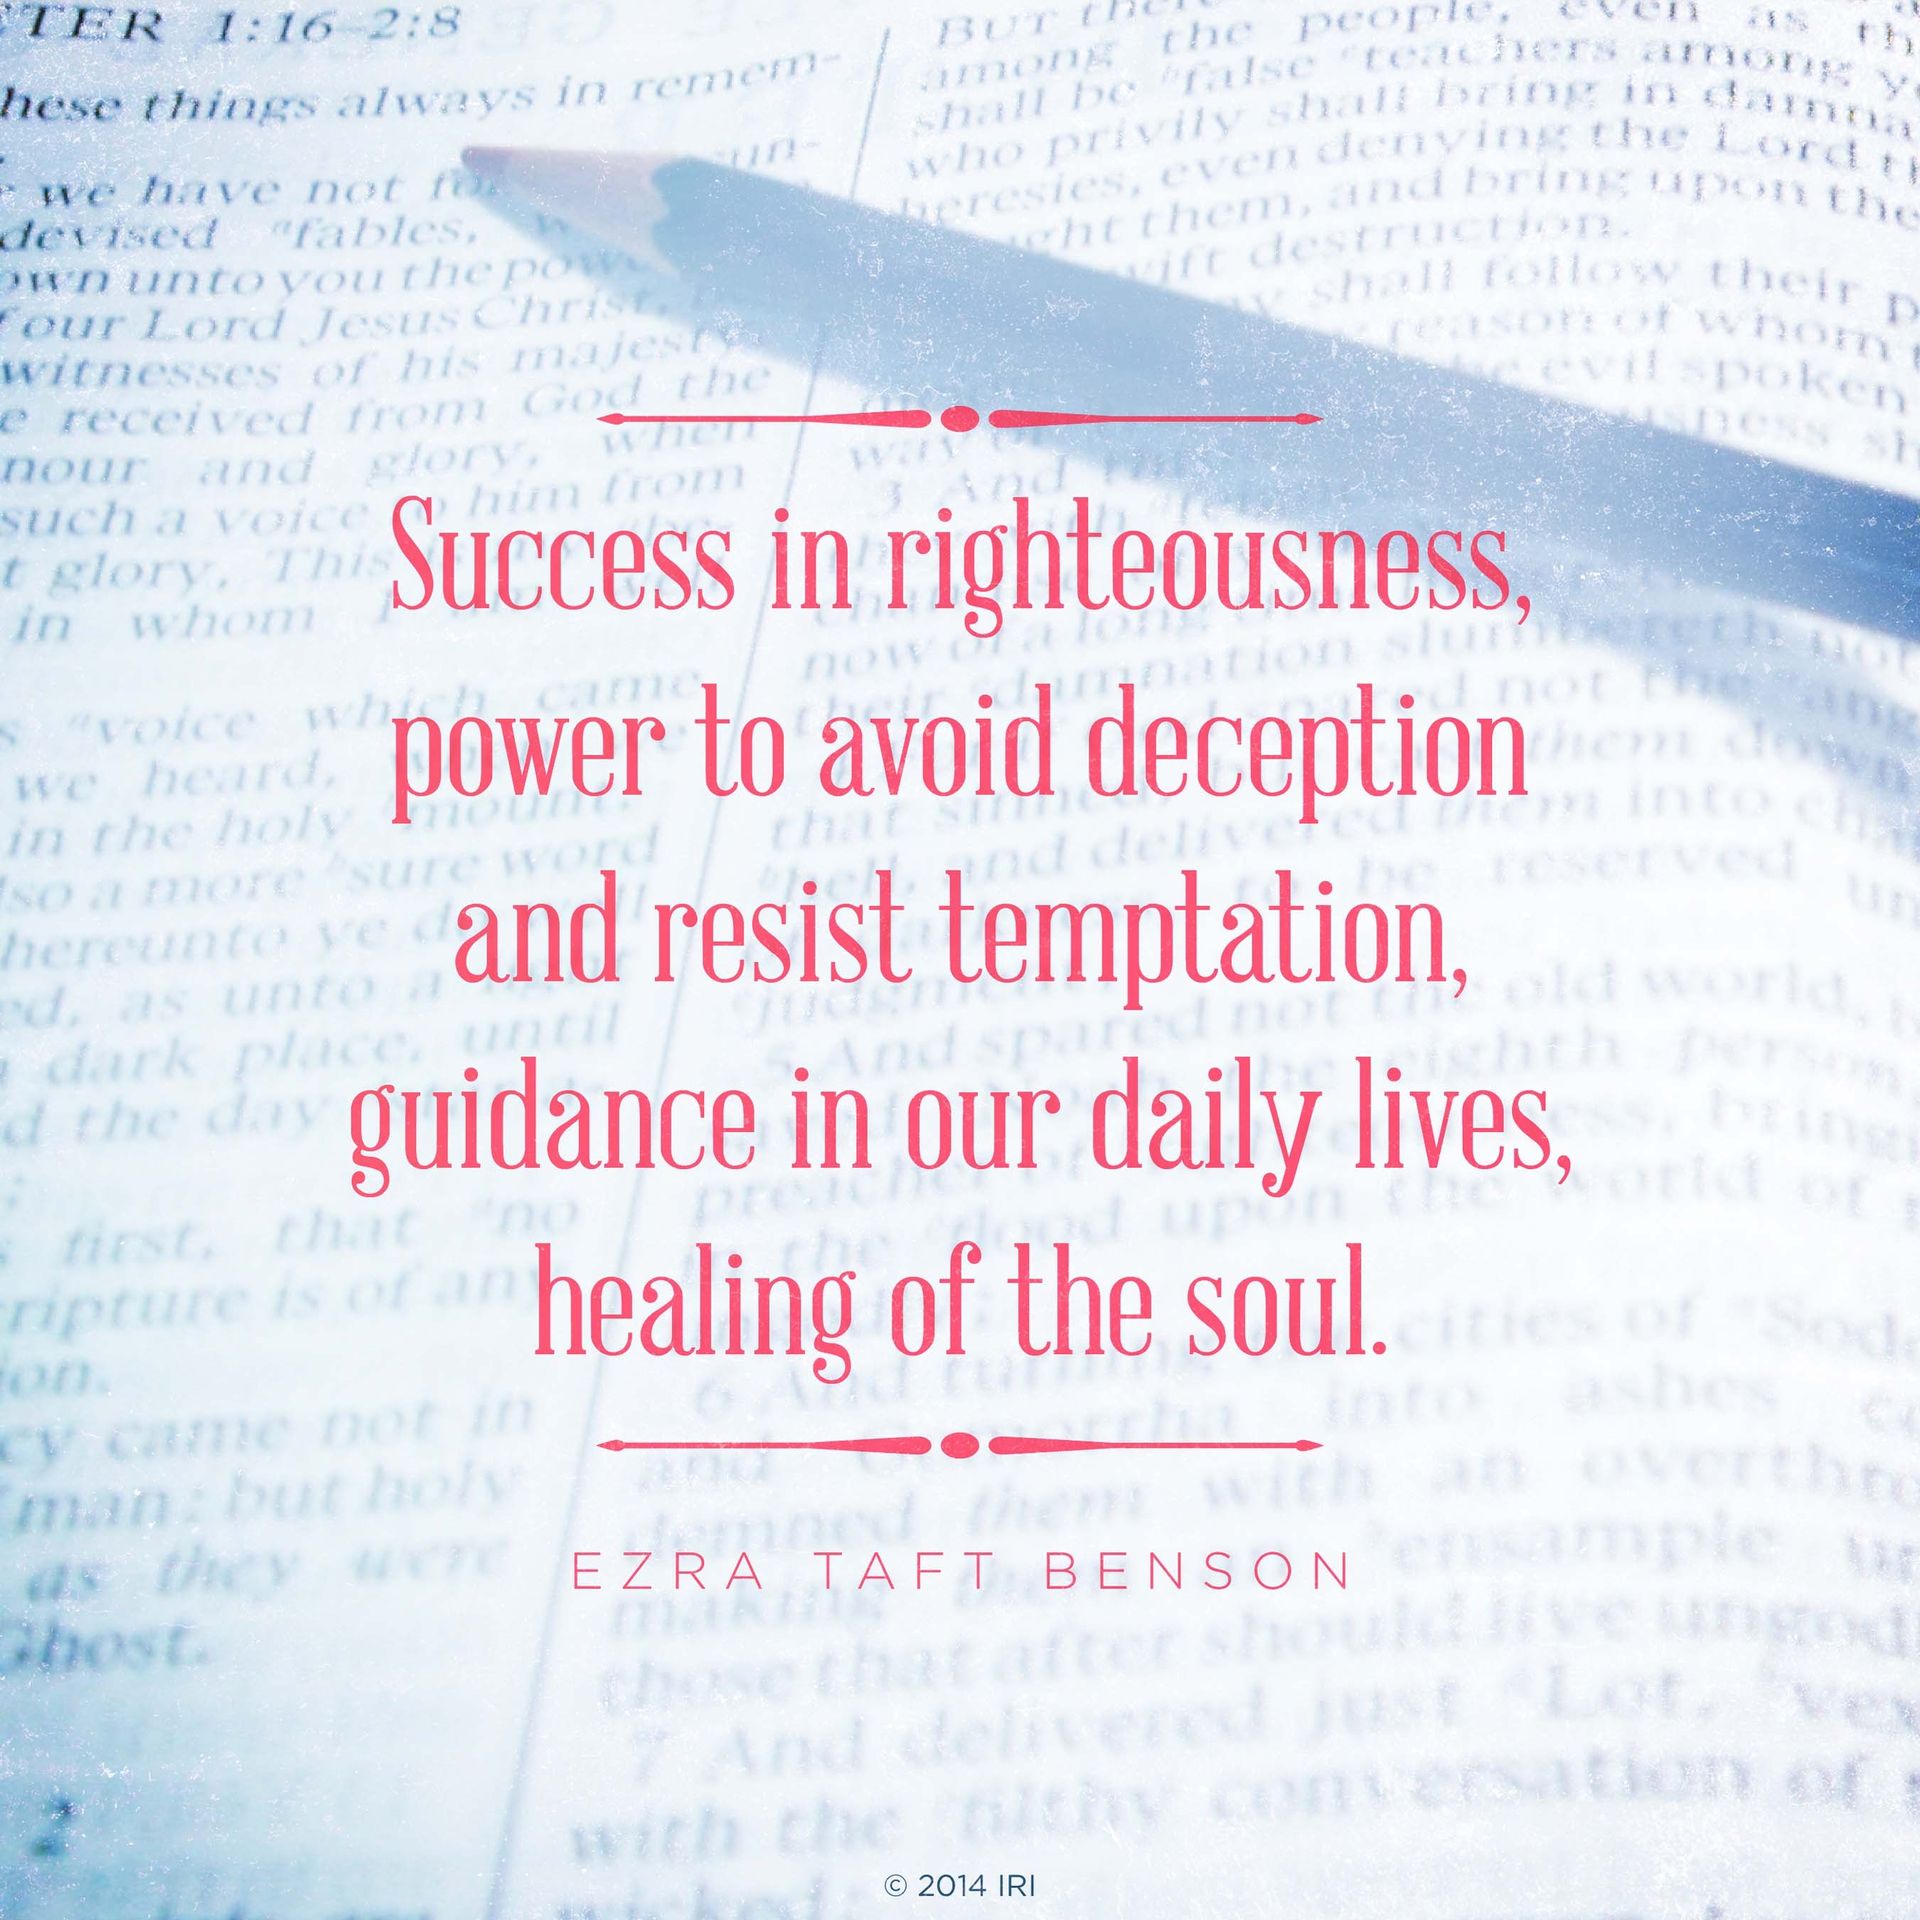 “Success in righteousness, power to avoid deception and resist temptation, guidance in our daily lives, healing of the soul.”—President Ezra Taft Benson, “The Power of the Word”